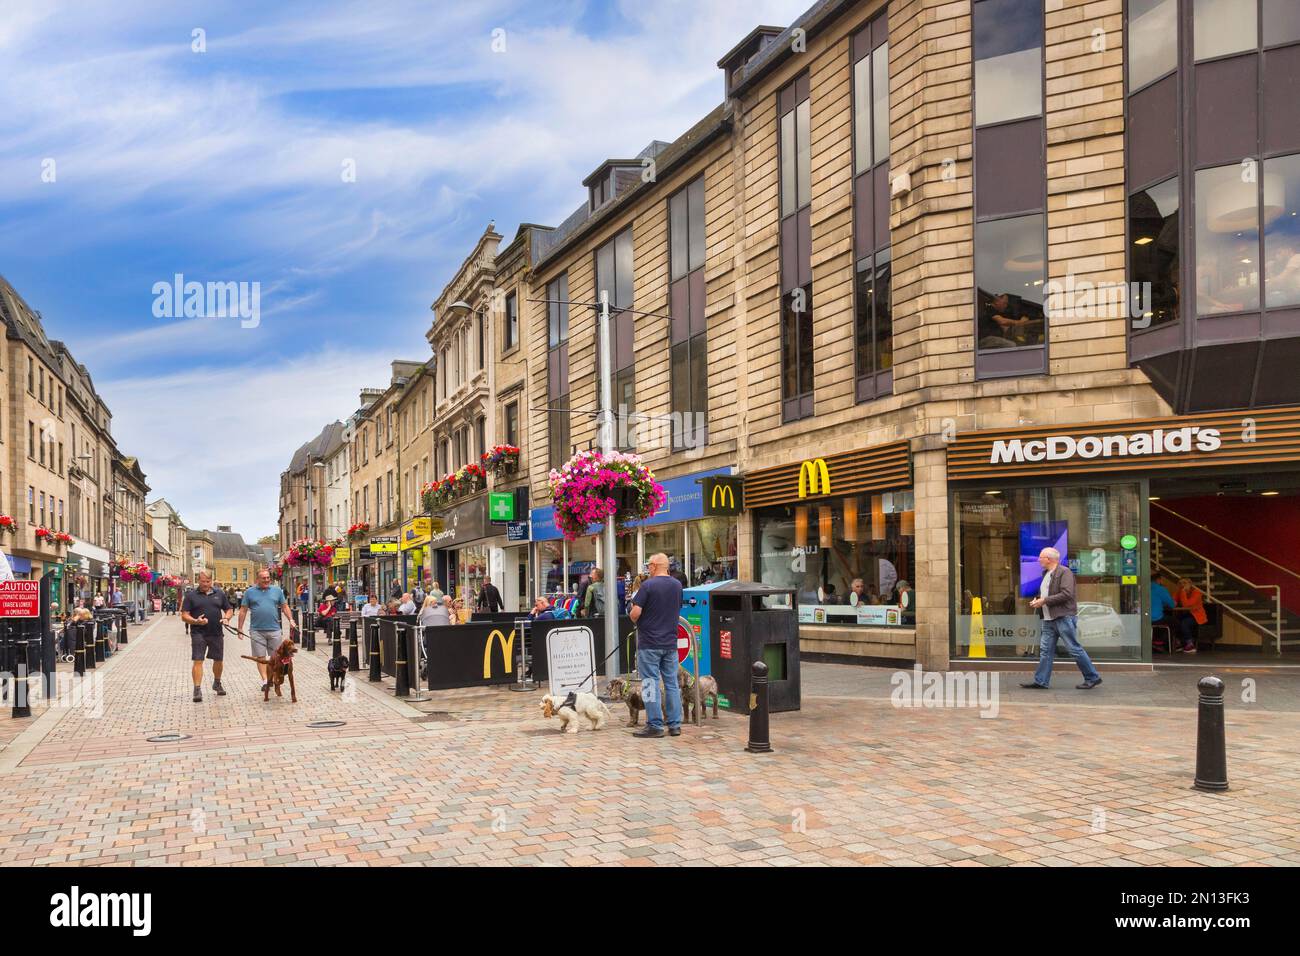 5 September 2022: Inverness, Highland, Scotland - A warm early autumn day in High Street, Inverness, with people, dogs,pavement cafes, McDonalds... Stock Photo